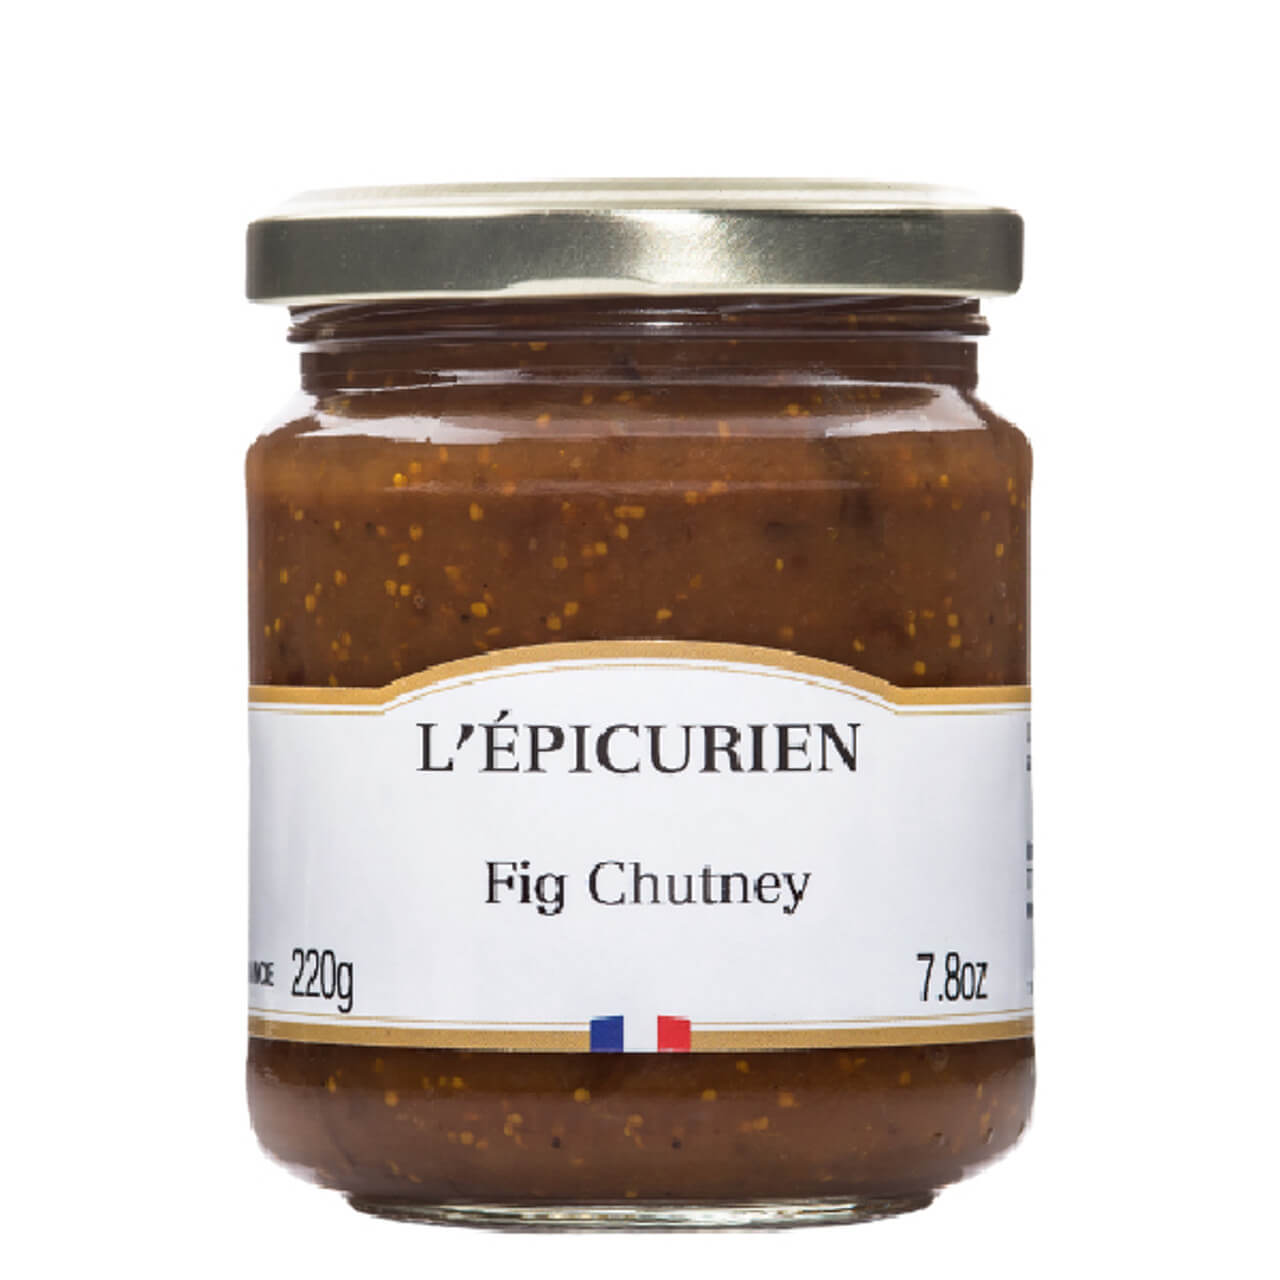 L'epicurien Fig Chutney | Sudha’s Emporium Gourmet, Gifts & Décor | Corning, NY